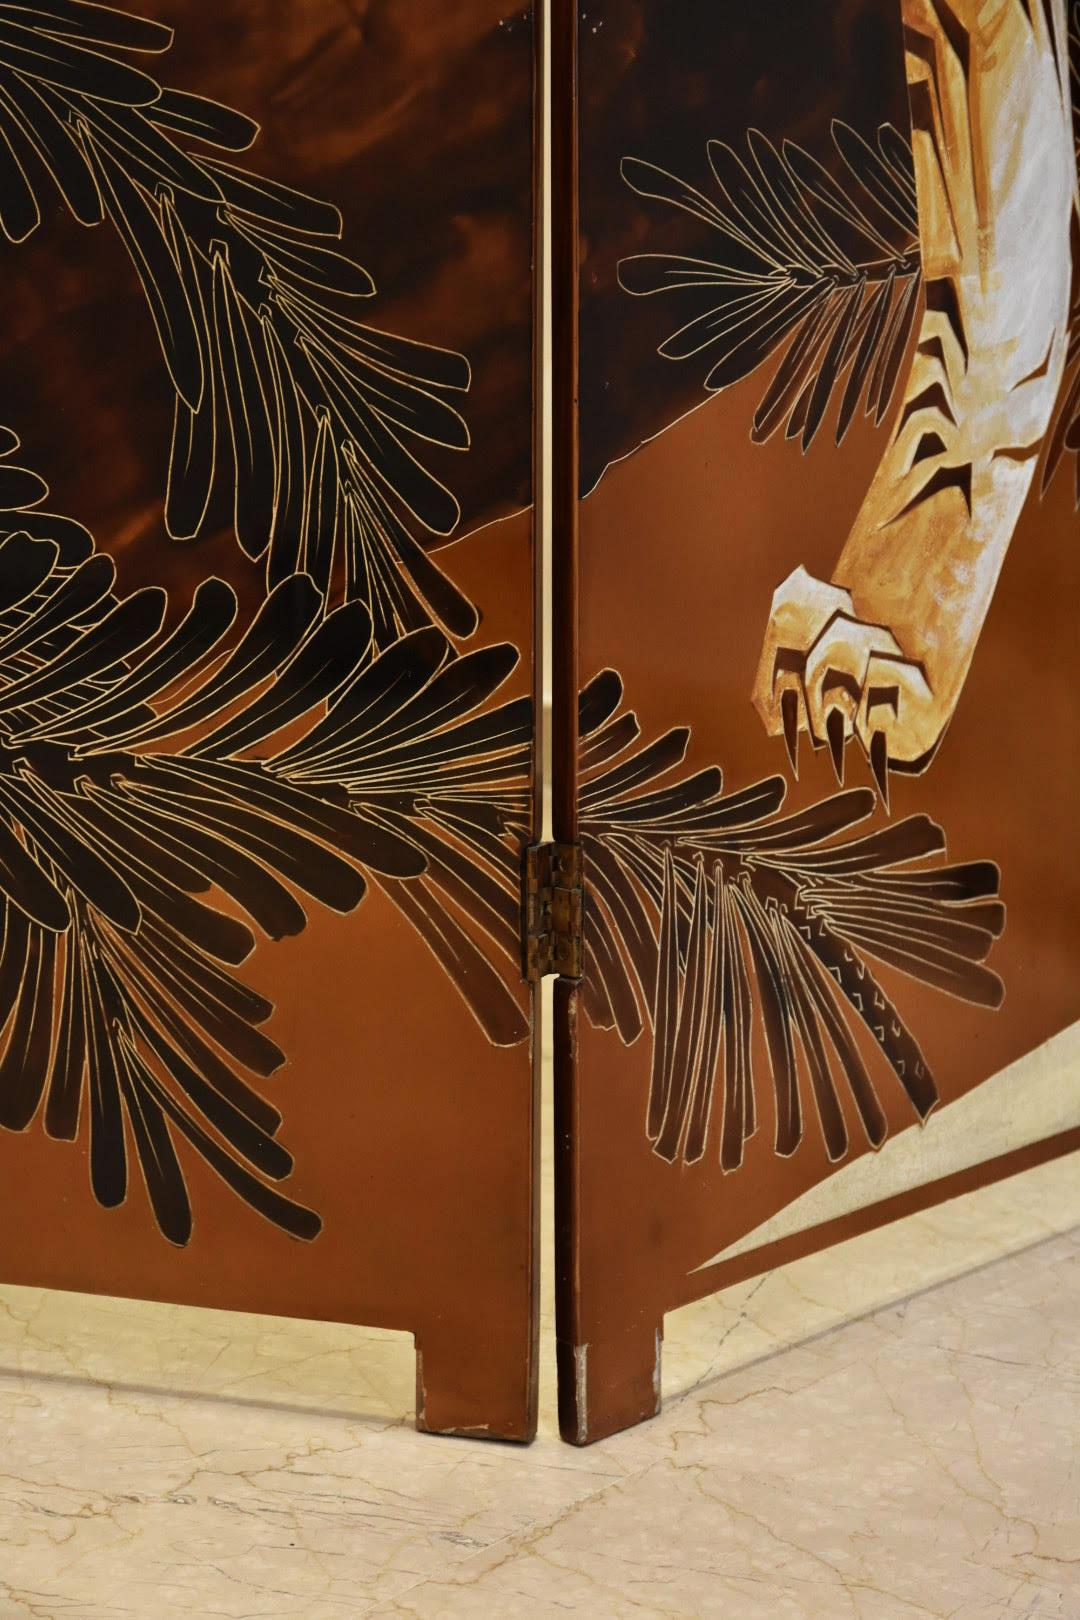 Splendid Louis Midavaine screen, circa 1925, with 3 articulated leaves in lacquered wood and lacquered wood decorated with a Bengal tiger leaping from an overturned coconut tree. The subject is treated in low relief and inlaid with off-white tinted